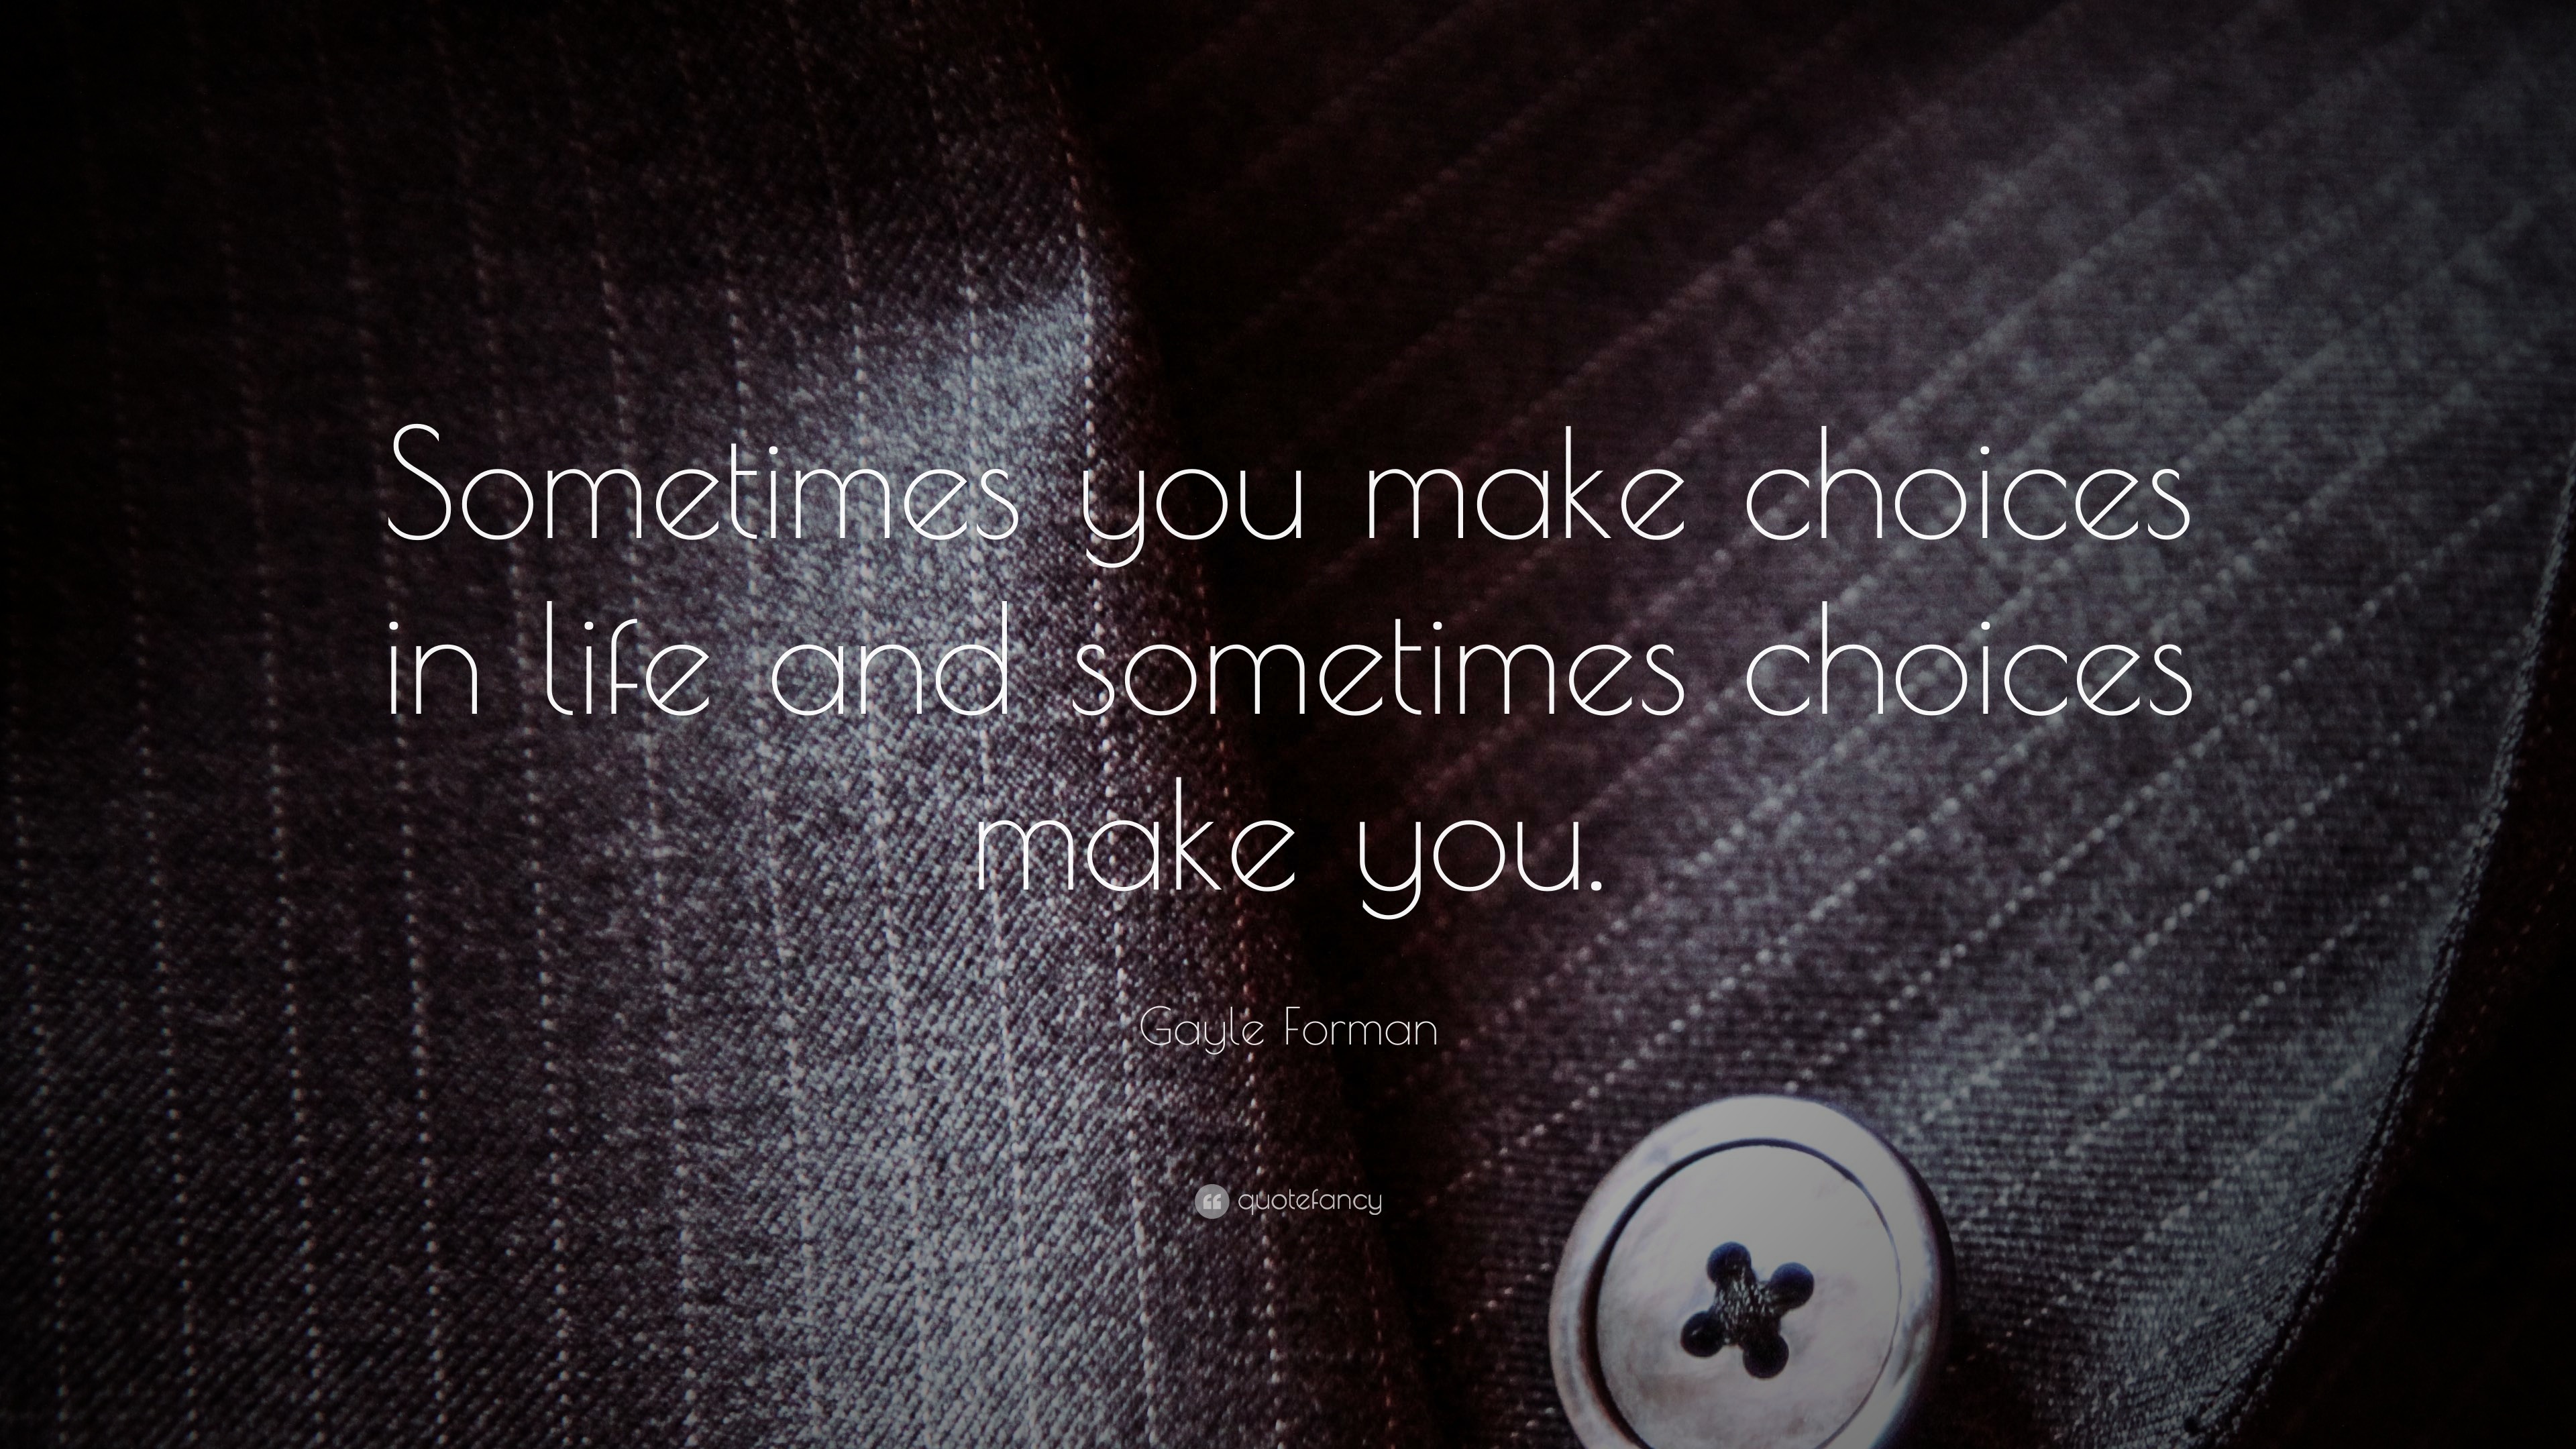 decisions in life quotes le forman quote u201csometimes you make choices in life and